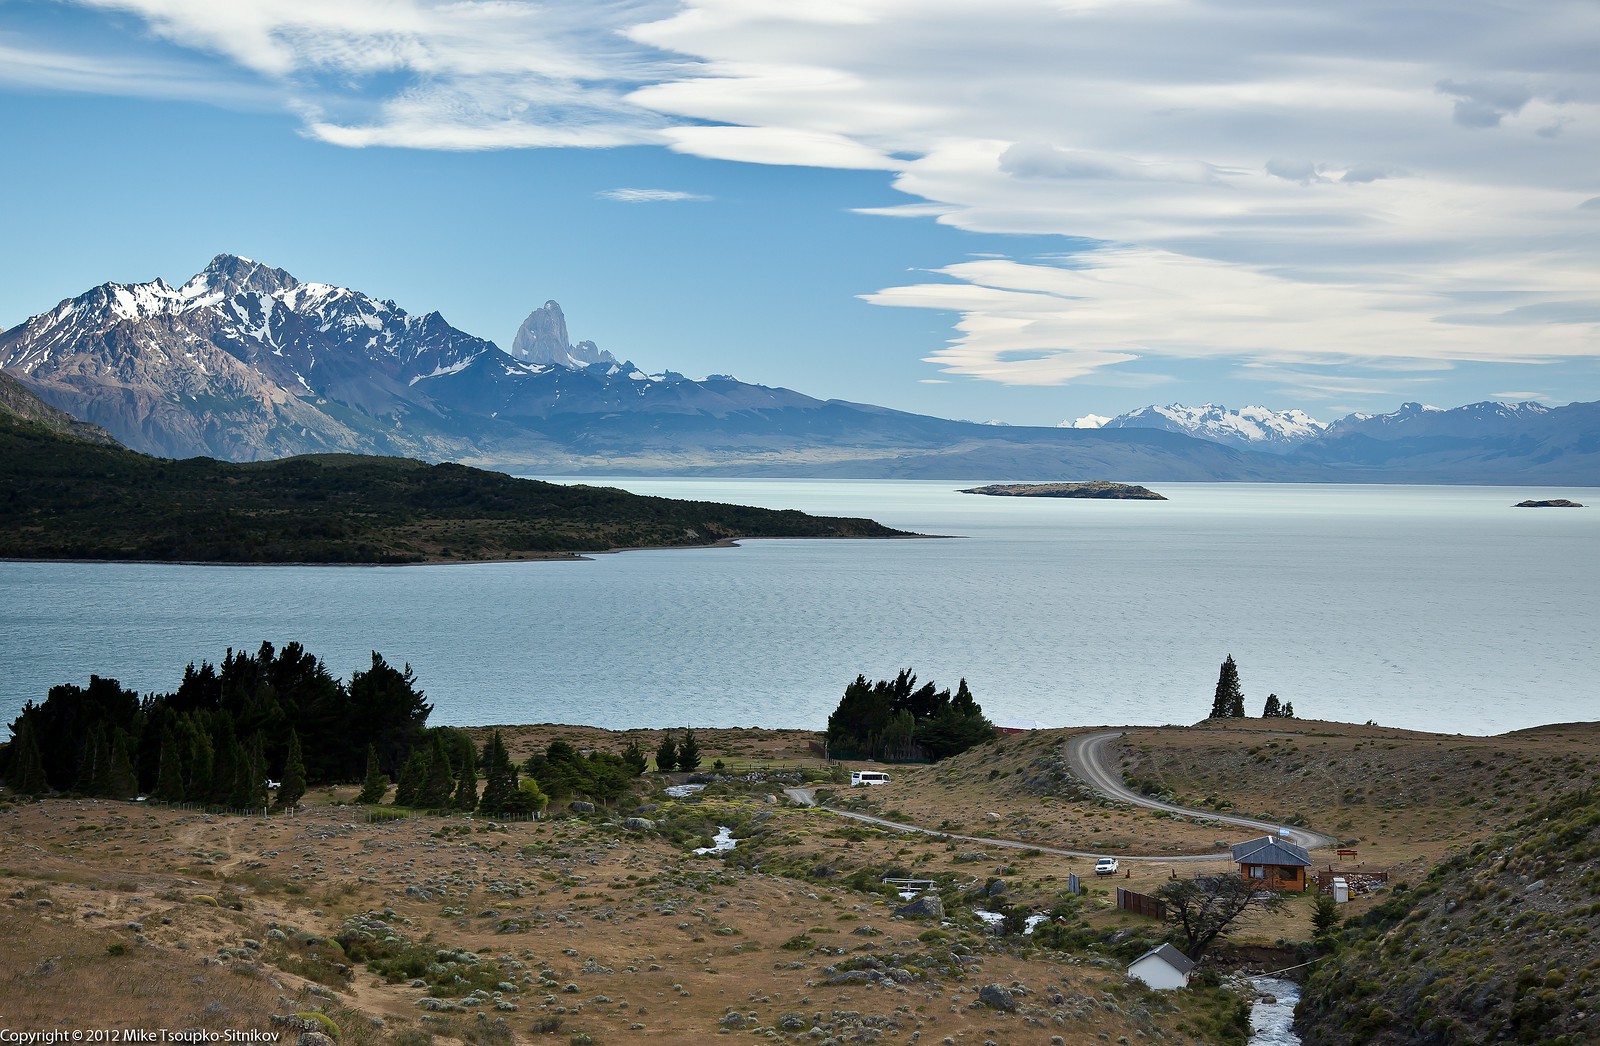 Lake Viedma and Mount Fitz Roy - a view from Laguna Azul trail